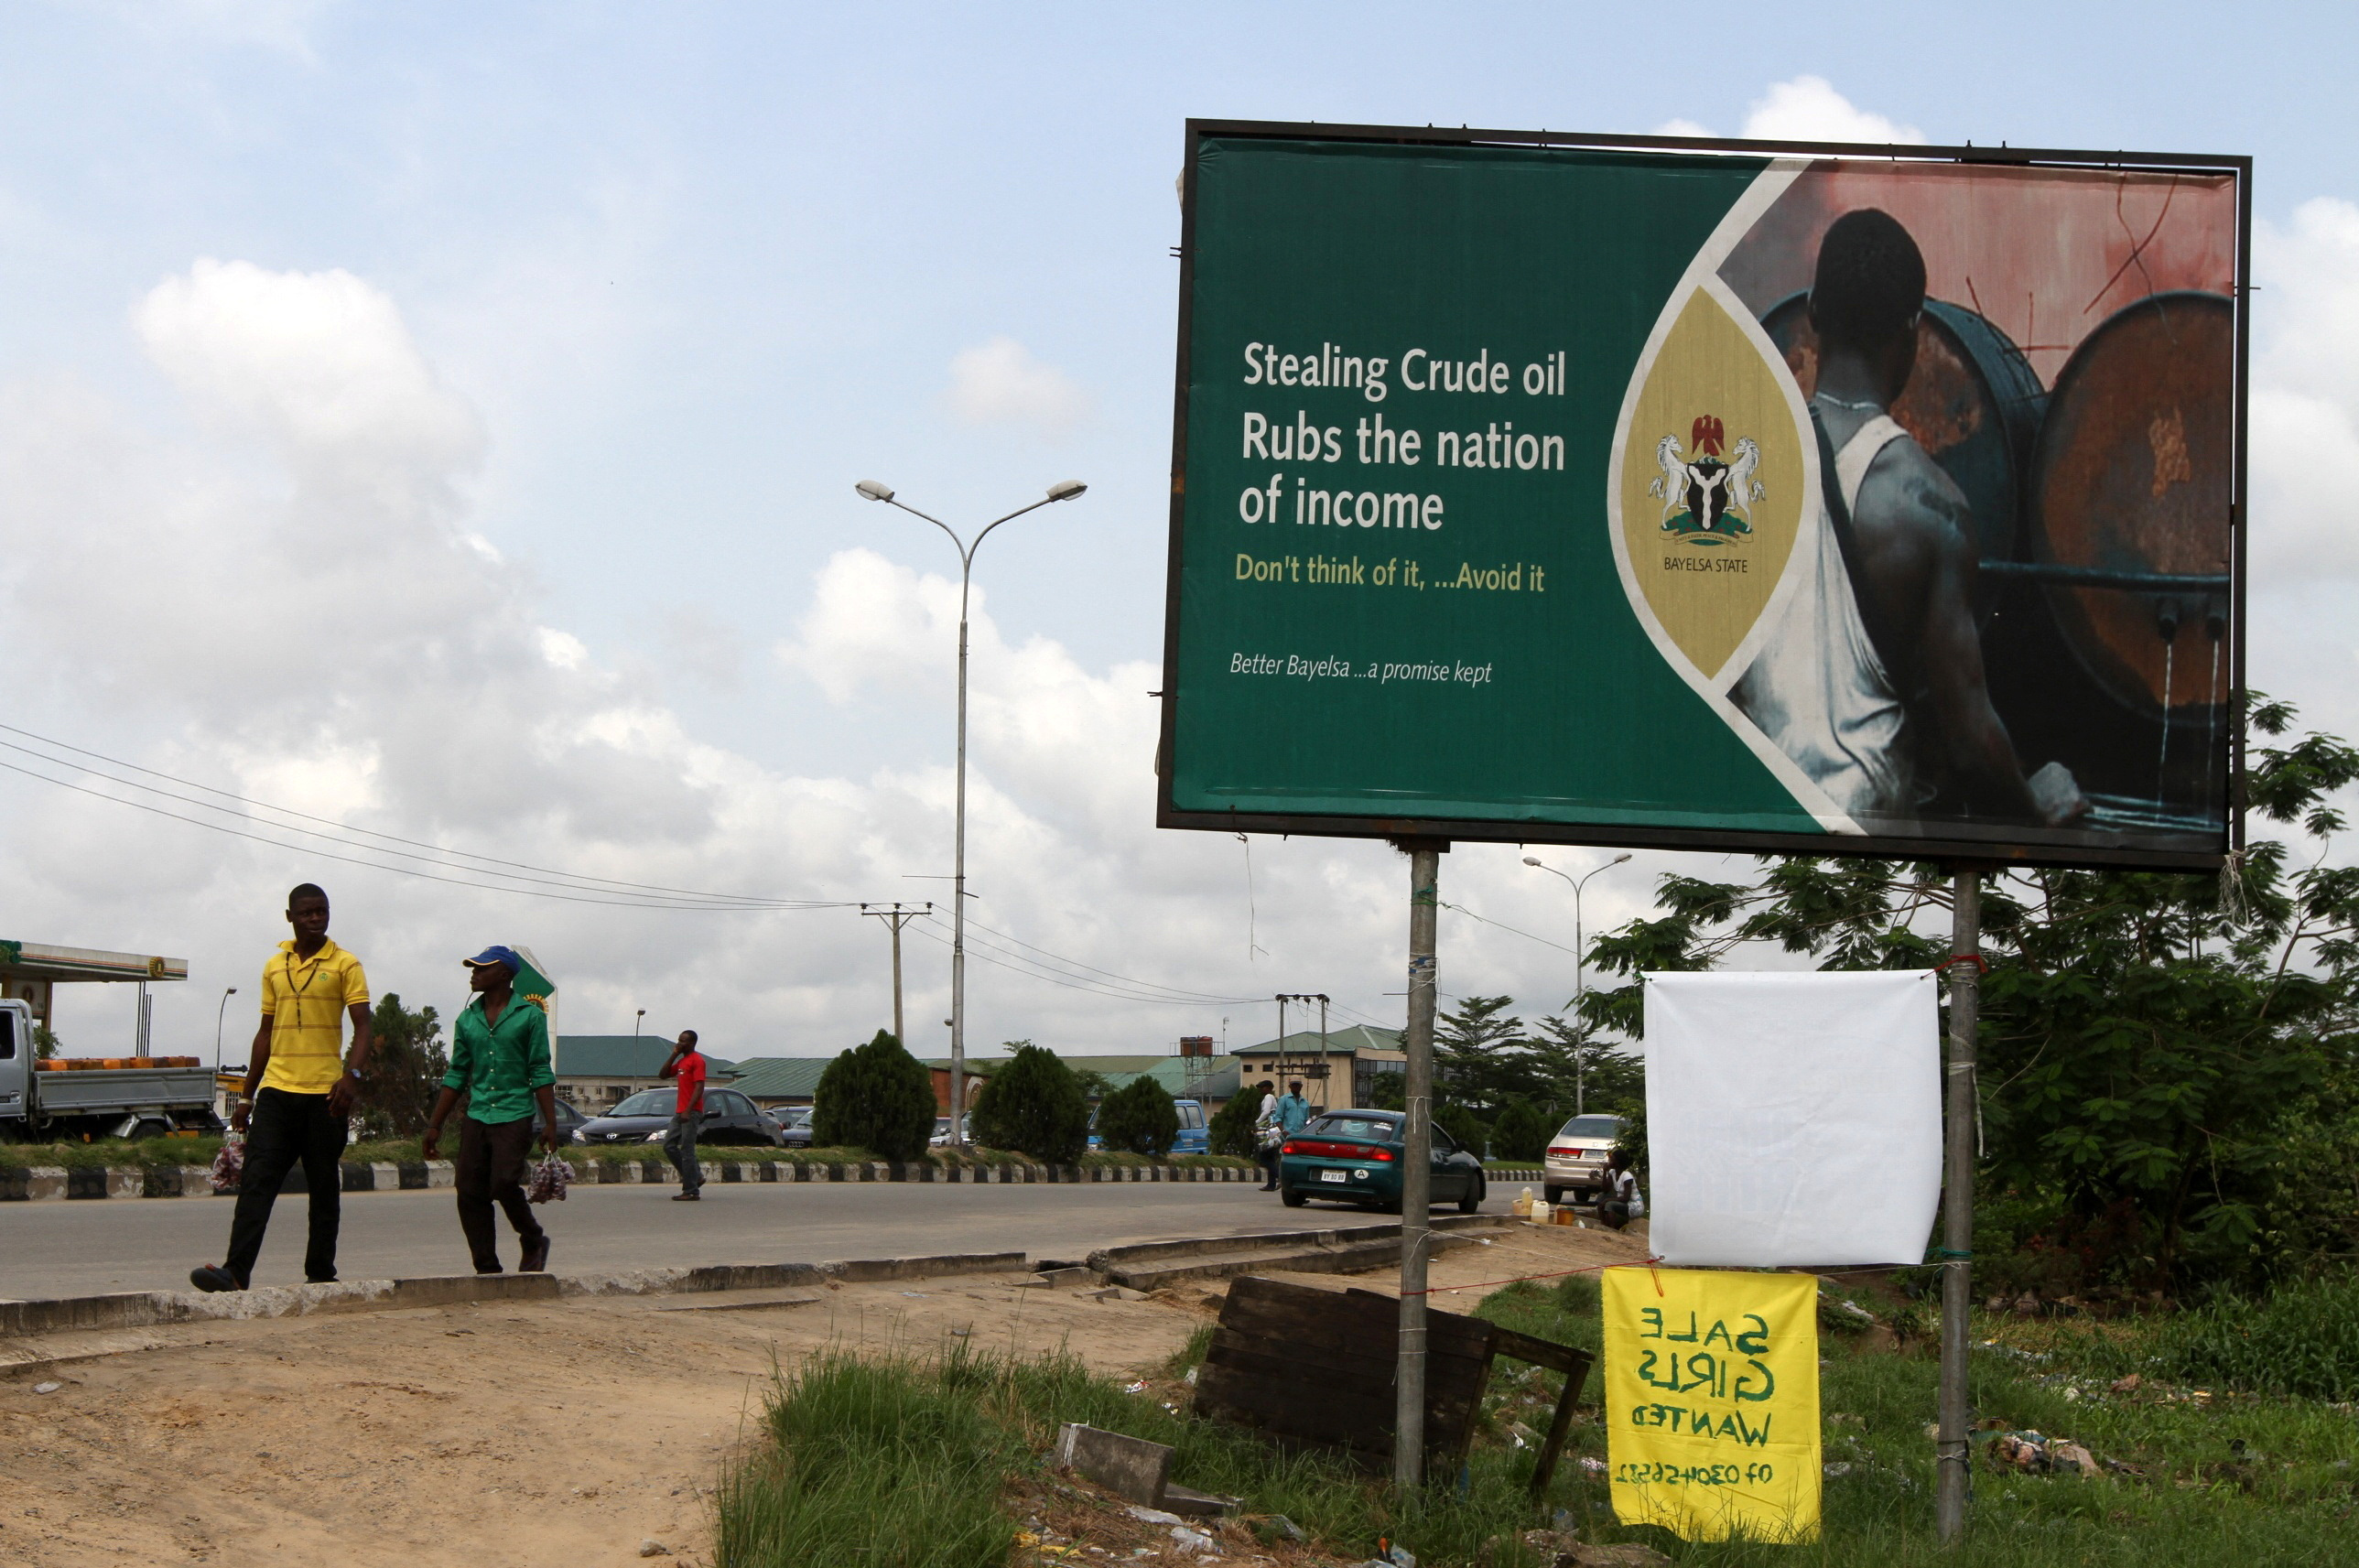 A billboard campaign against crude oil theft is seen alongside a road in Yenagoa, the capital of Nigeria's oil state of Bayelsa